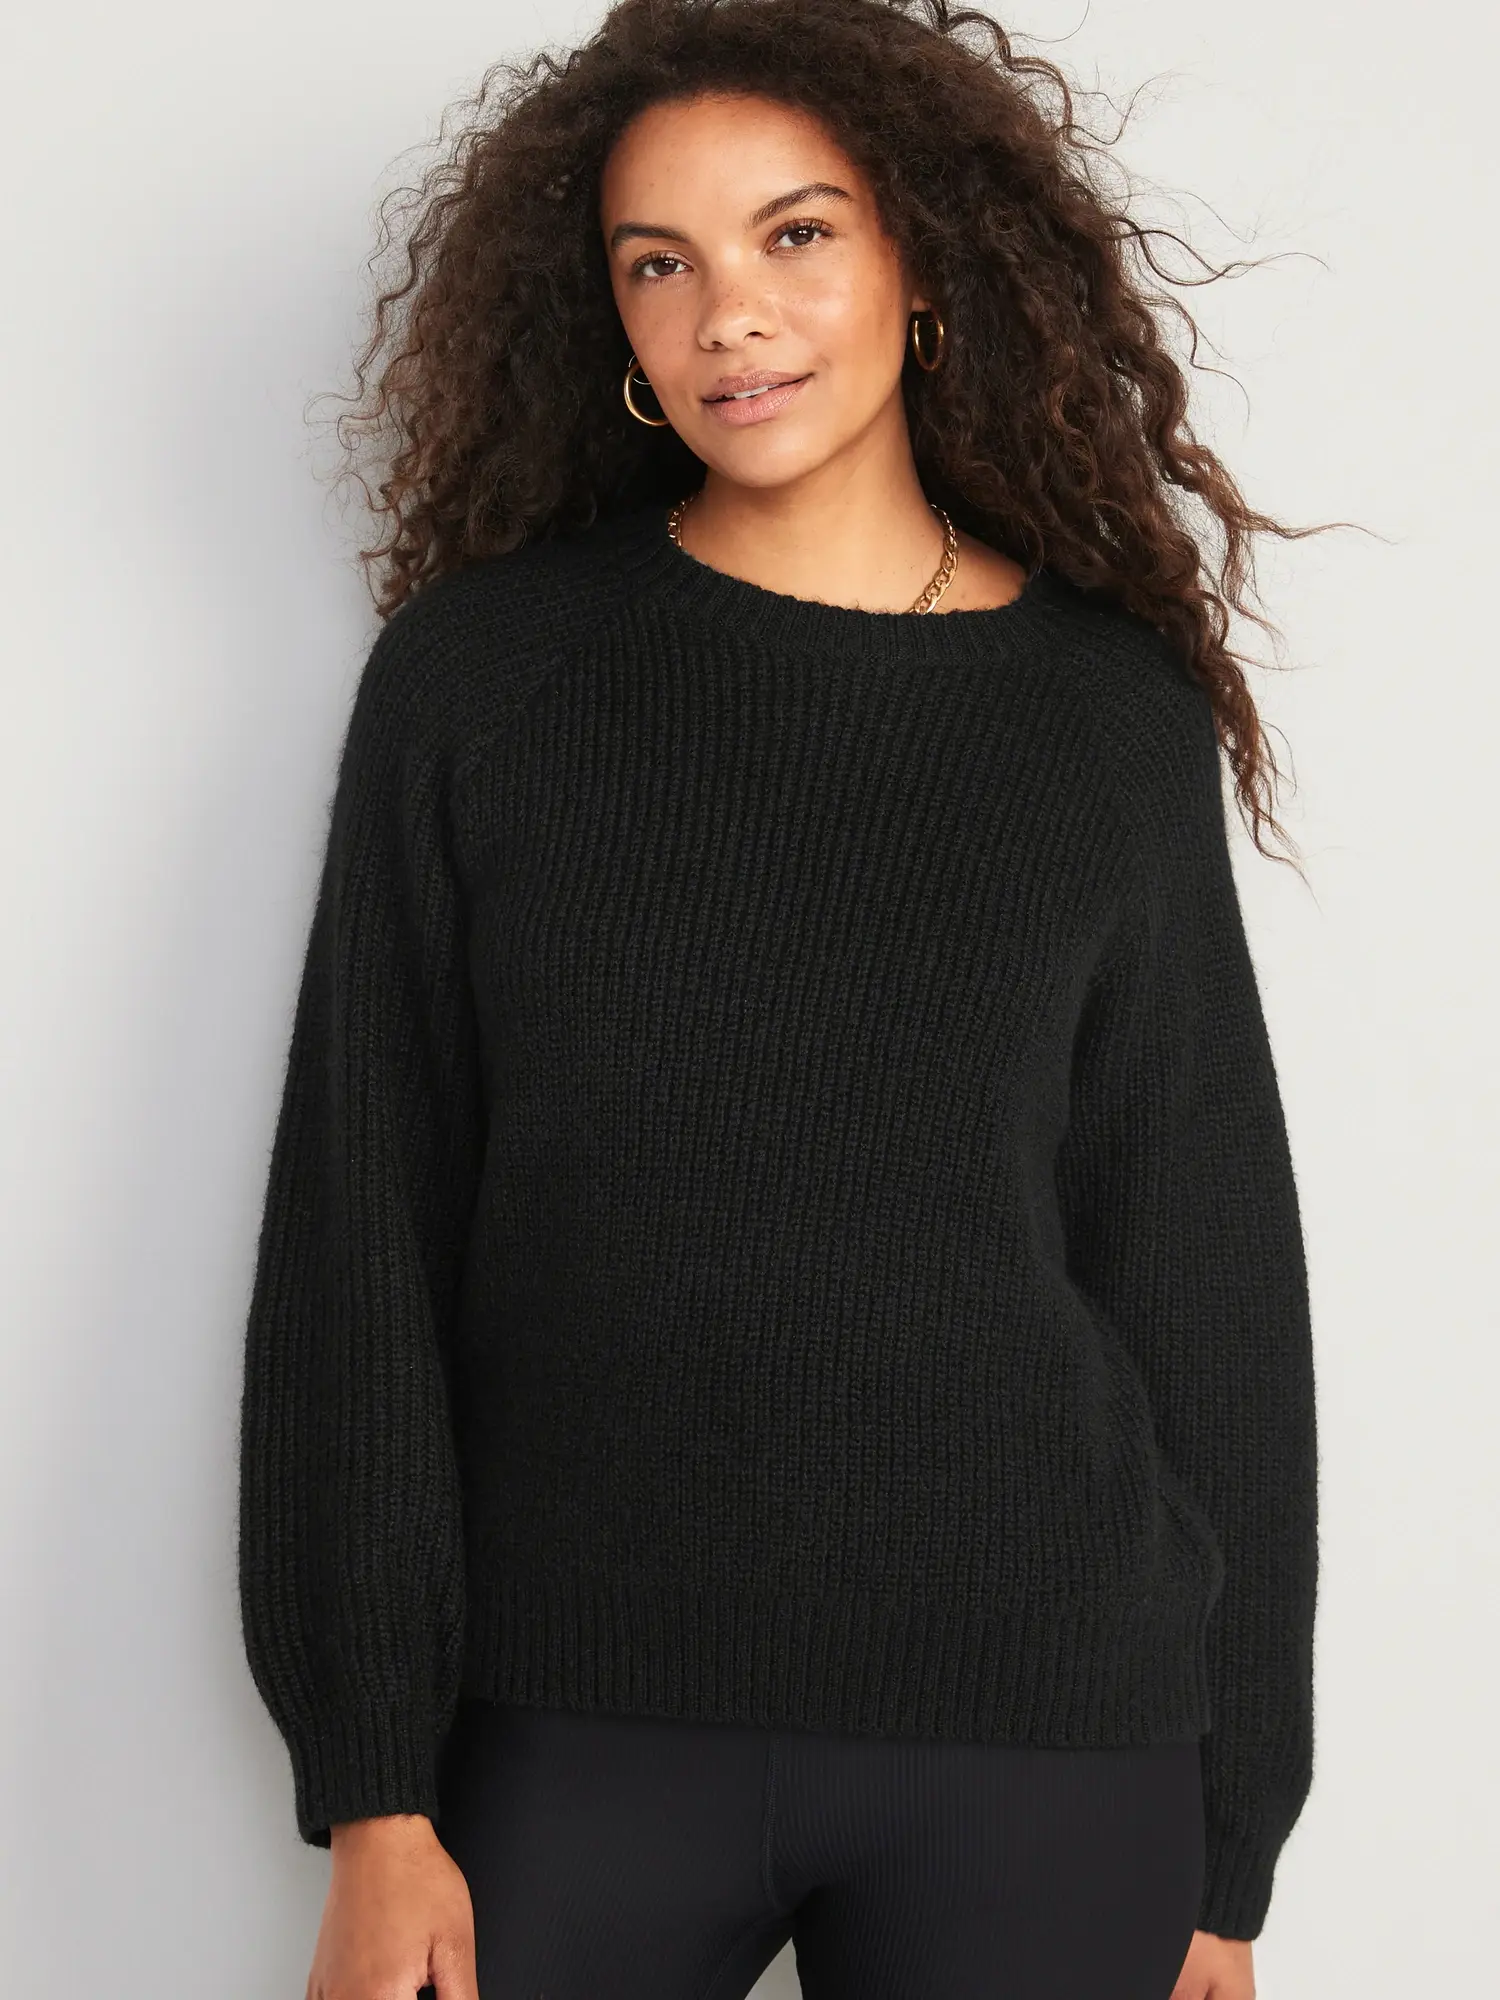 Old Navy Cozy Shaker-Stitch Pullover Sweater for Women black. 1